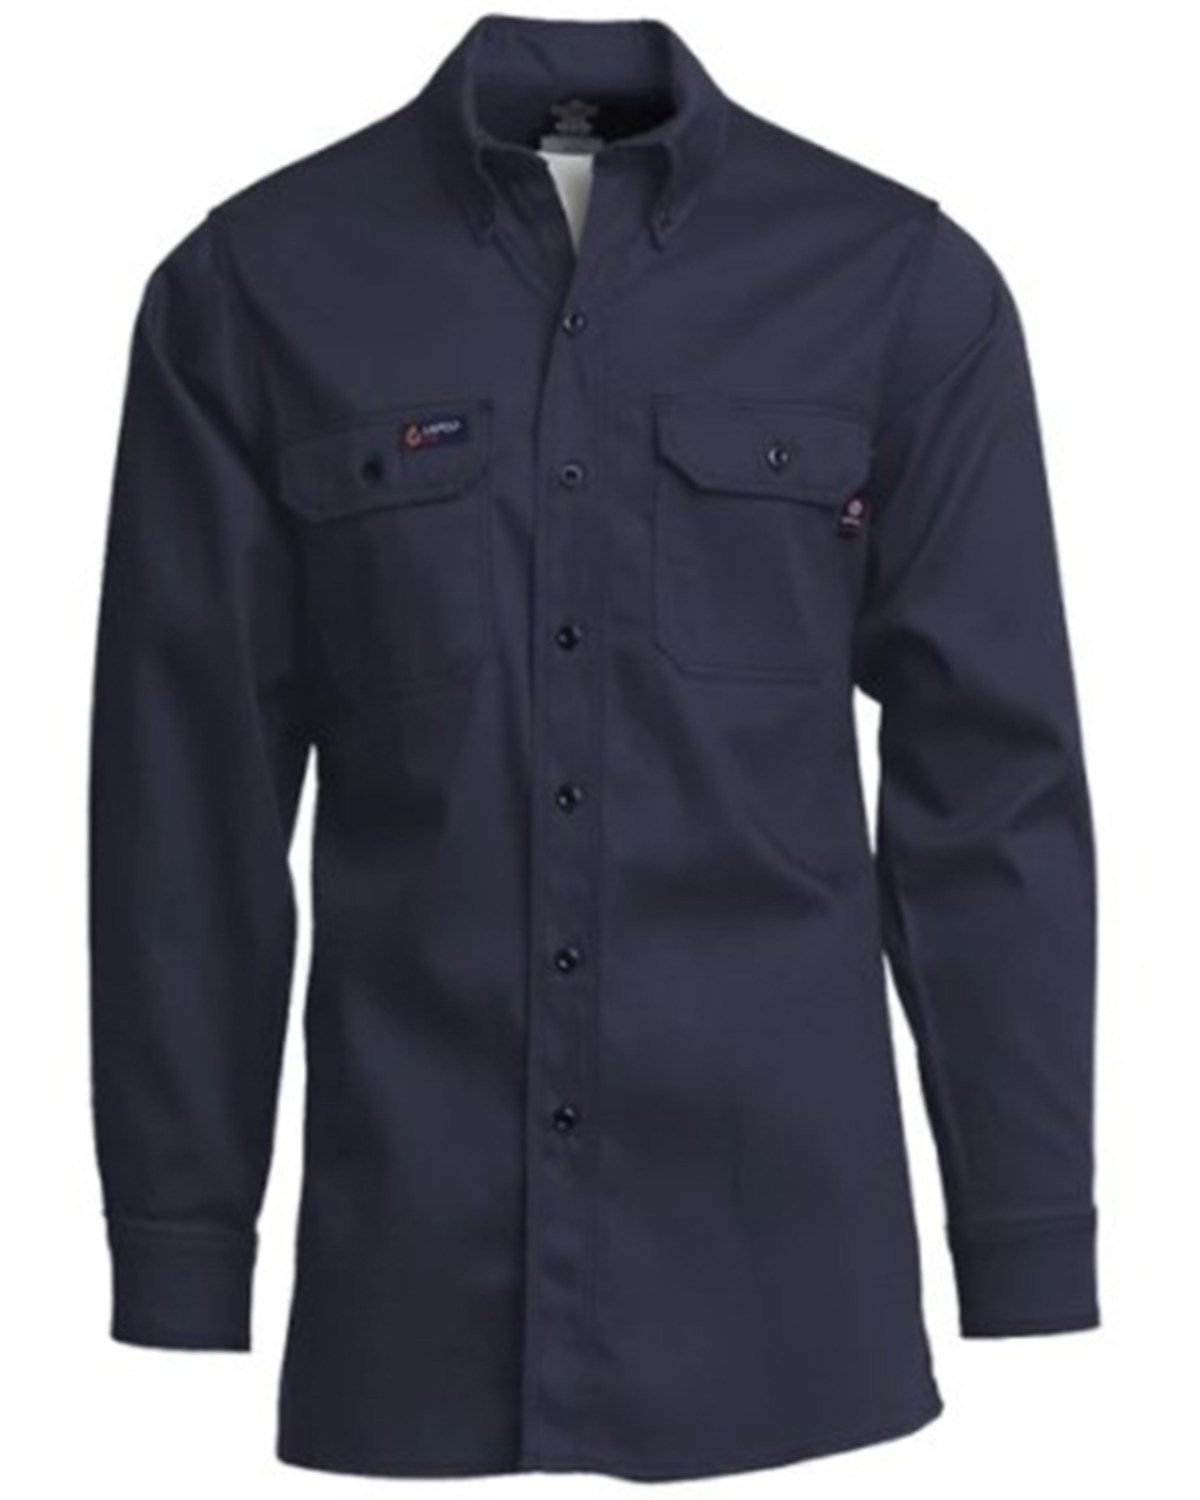 Lapco Men's FR Solid Navy Long Sleeve Button-Down Work Shirt - Big